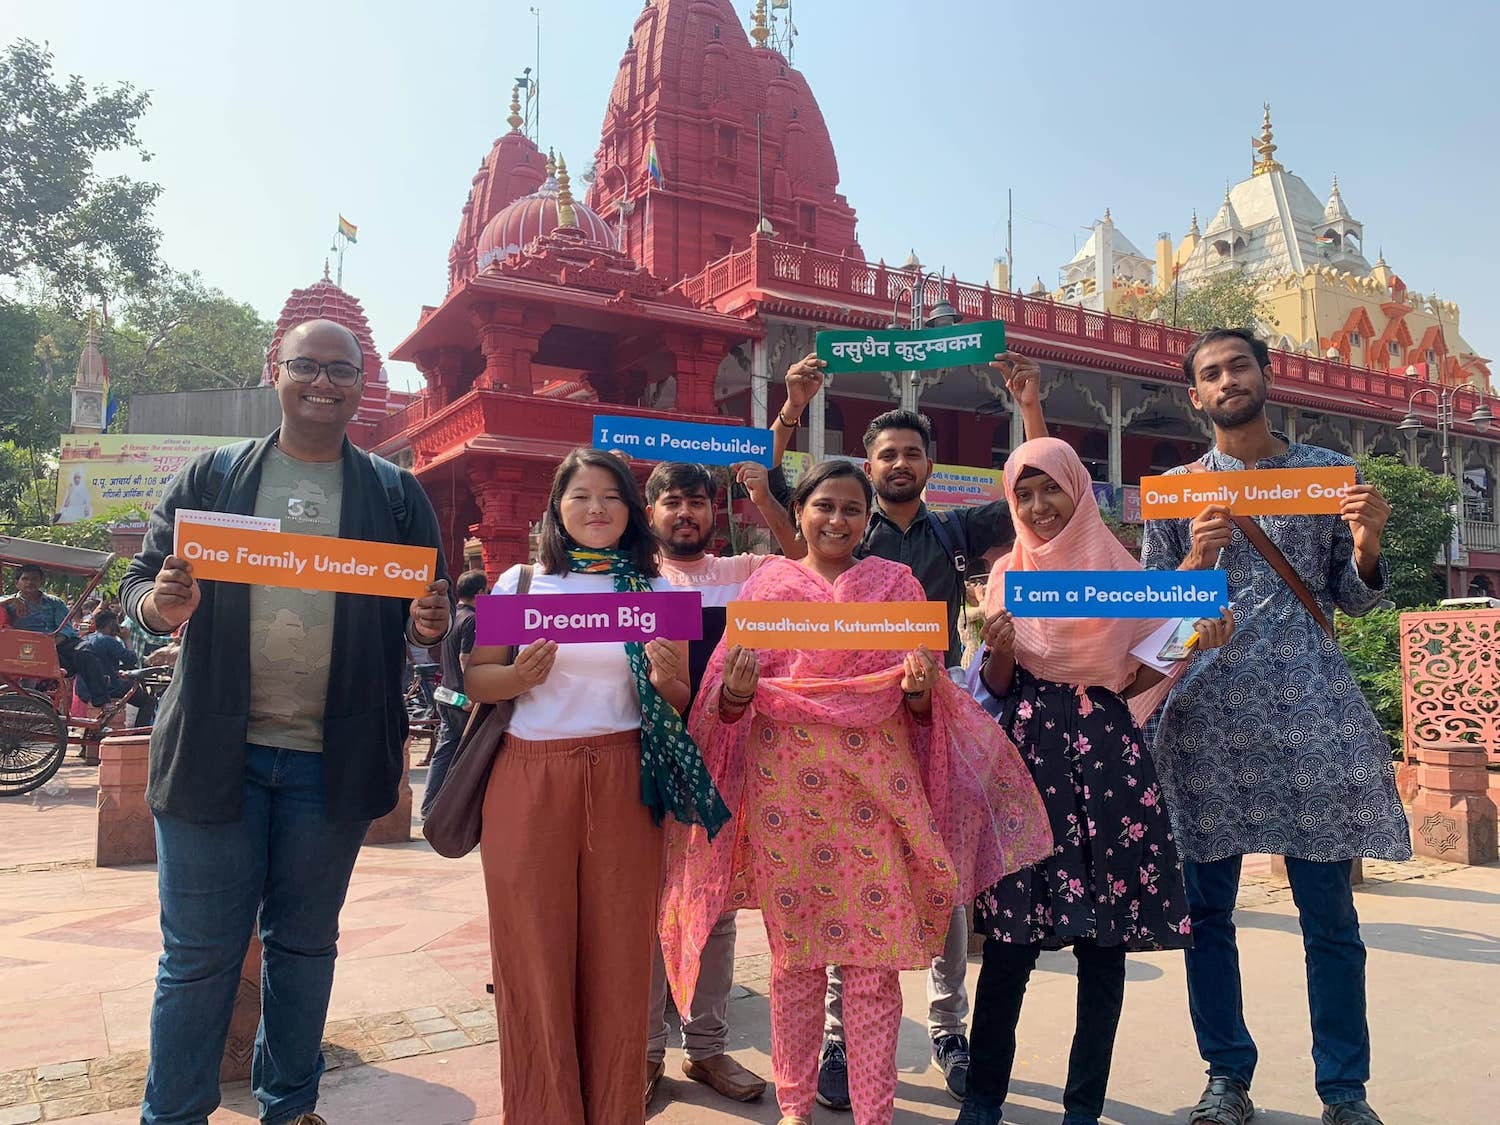 A group of people promoting interfaith leadership by holding signs in front of a temple.